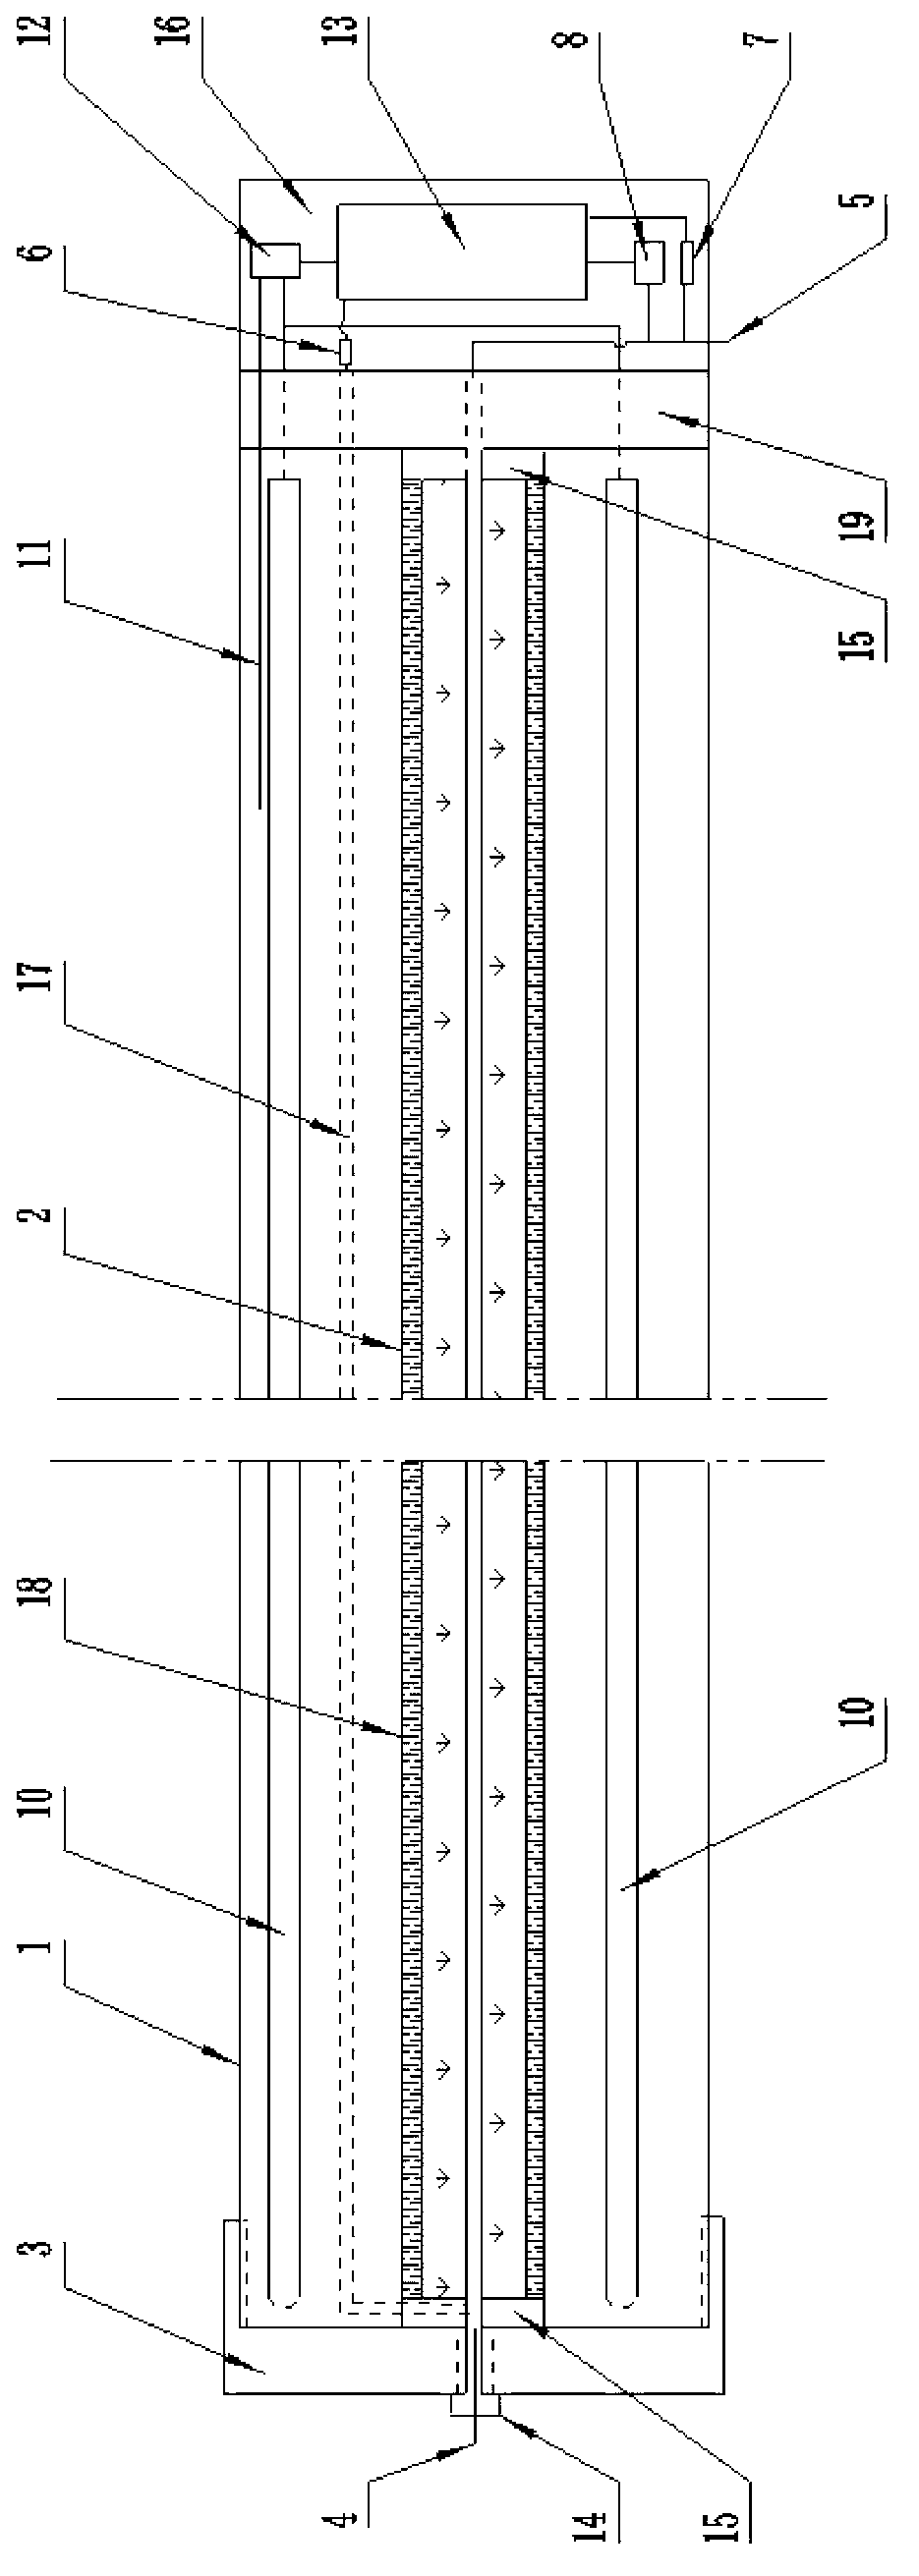 Online rapid viscosity measuring device for rock core displacement experiment under high temperature and high pressure